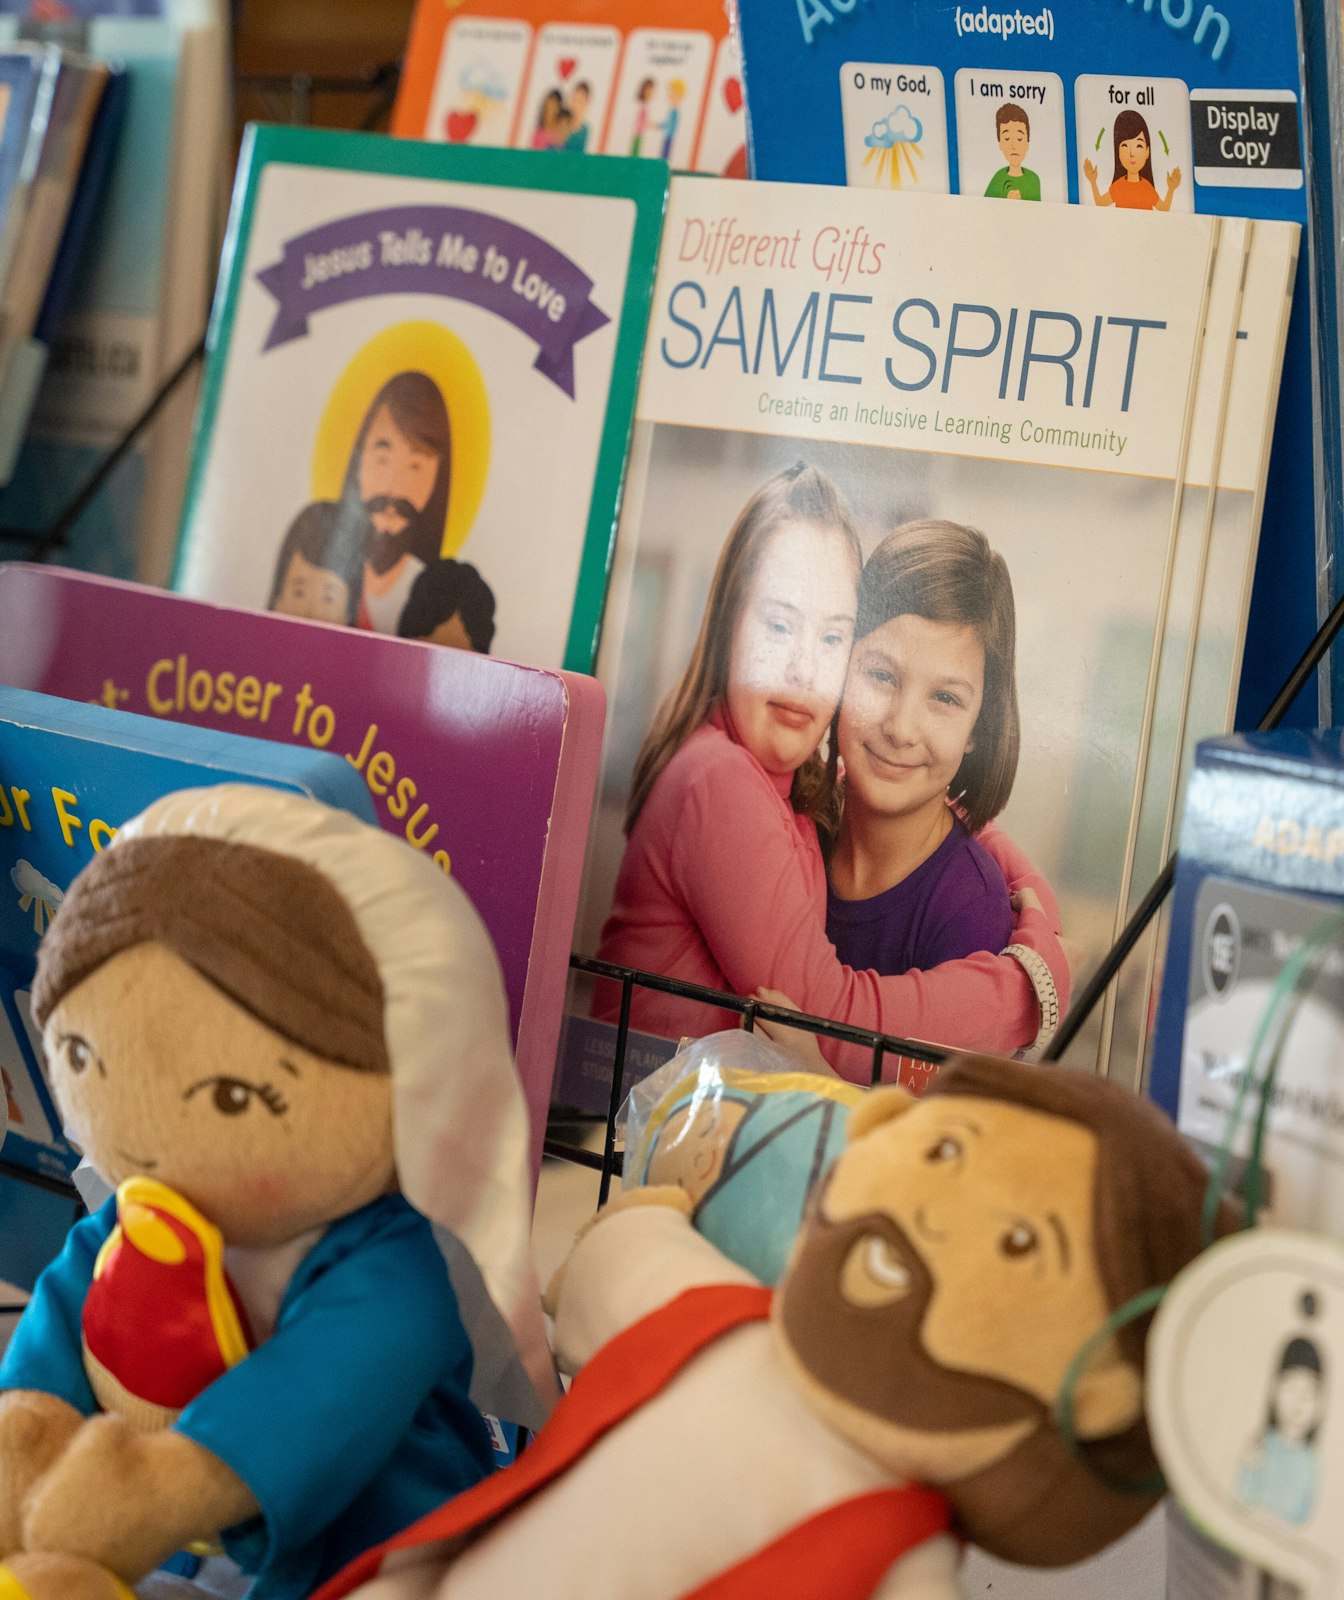 Children's books and toys promoting inclusiveness for people with disabilities are featured at the August 5 conference.  (Valaurian Waller | Detroit Catholic)